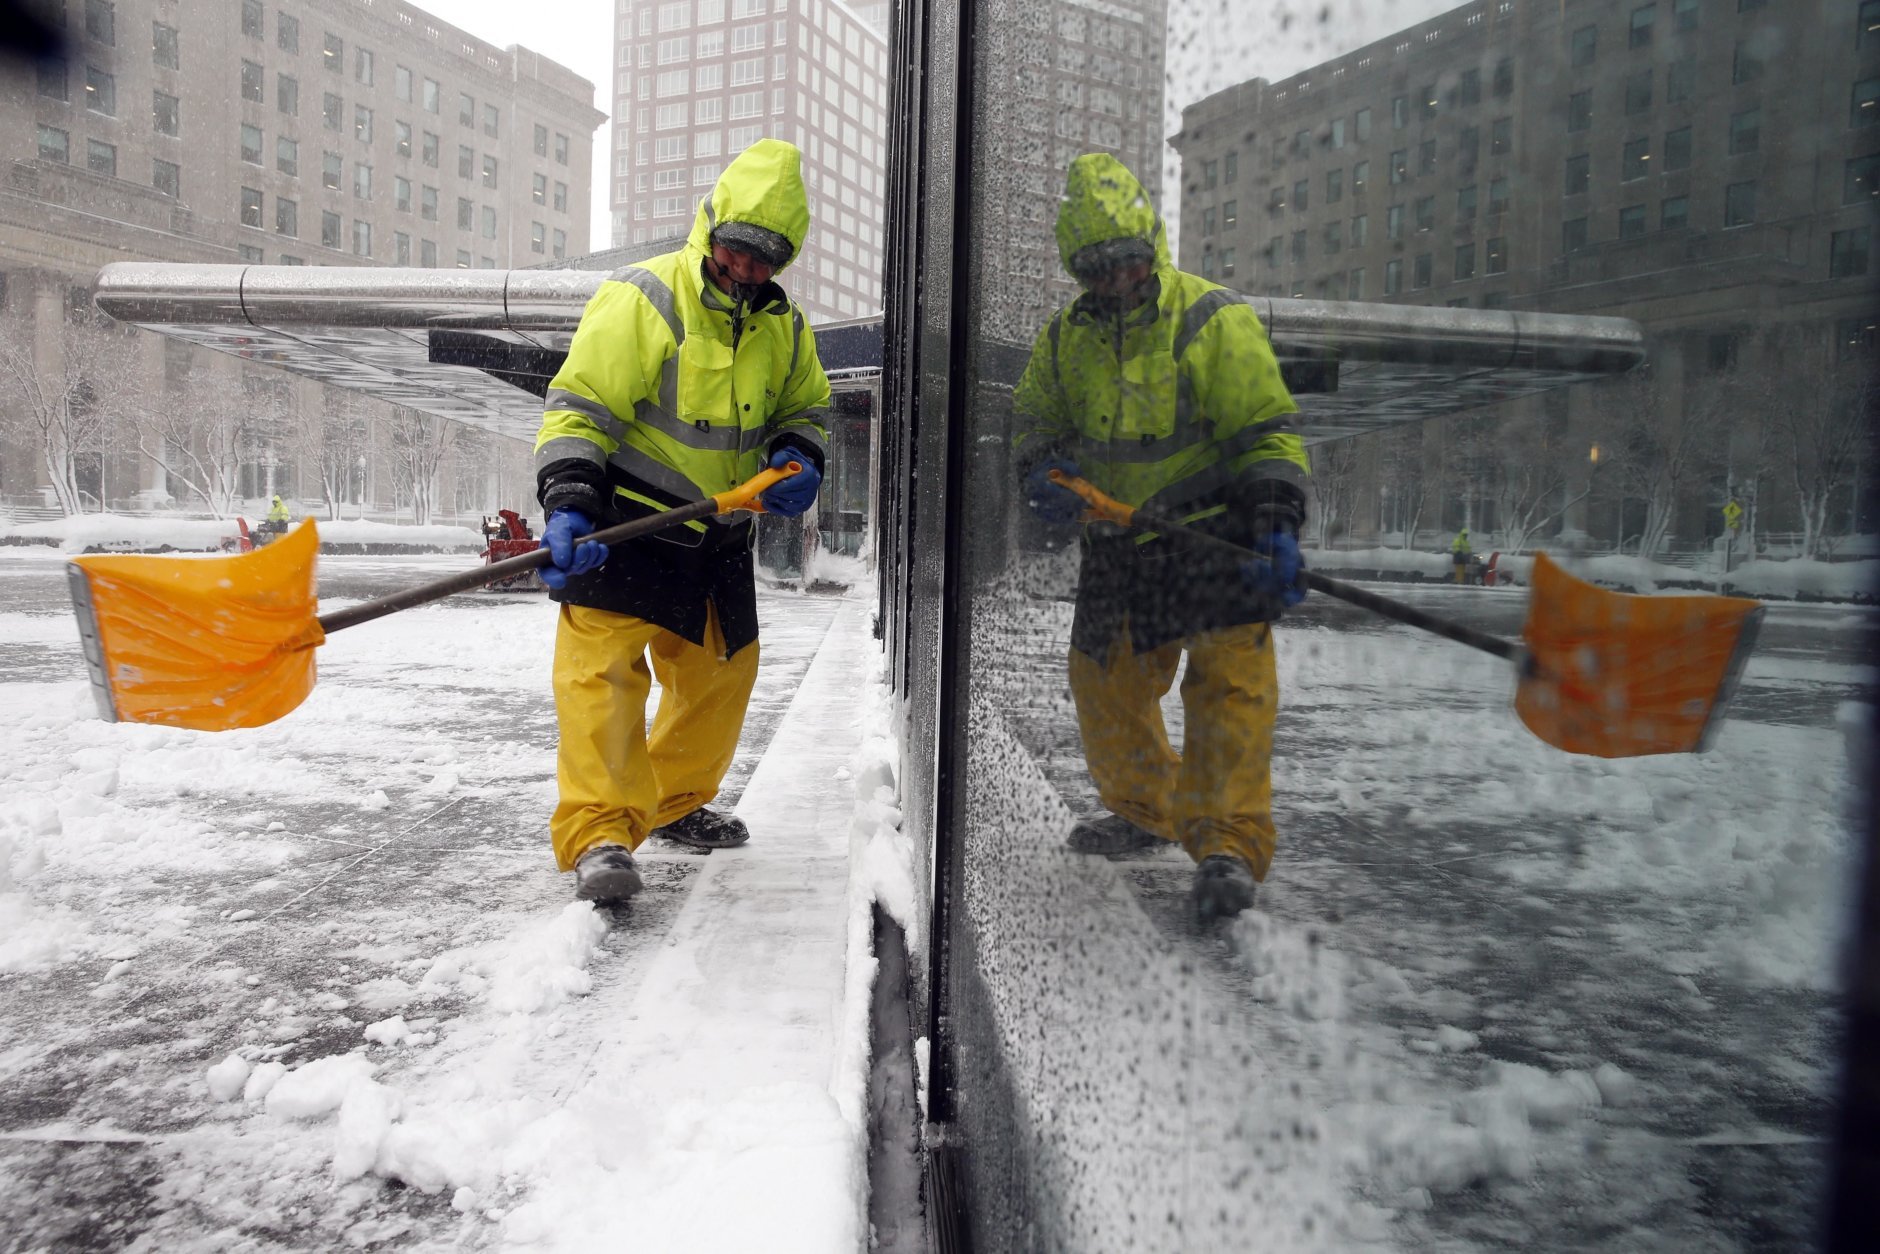 A worker shoveling snow is reflected in a building's plate glass window during a snowstorm, Tuesday, March 13, 2018, in Boston. (AP Photo/Michael Dwyer)